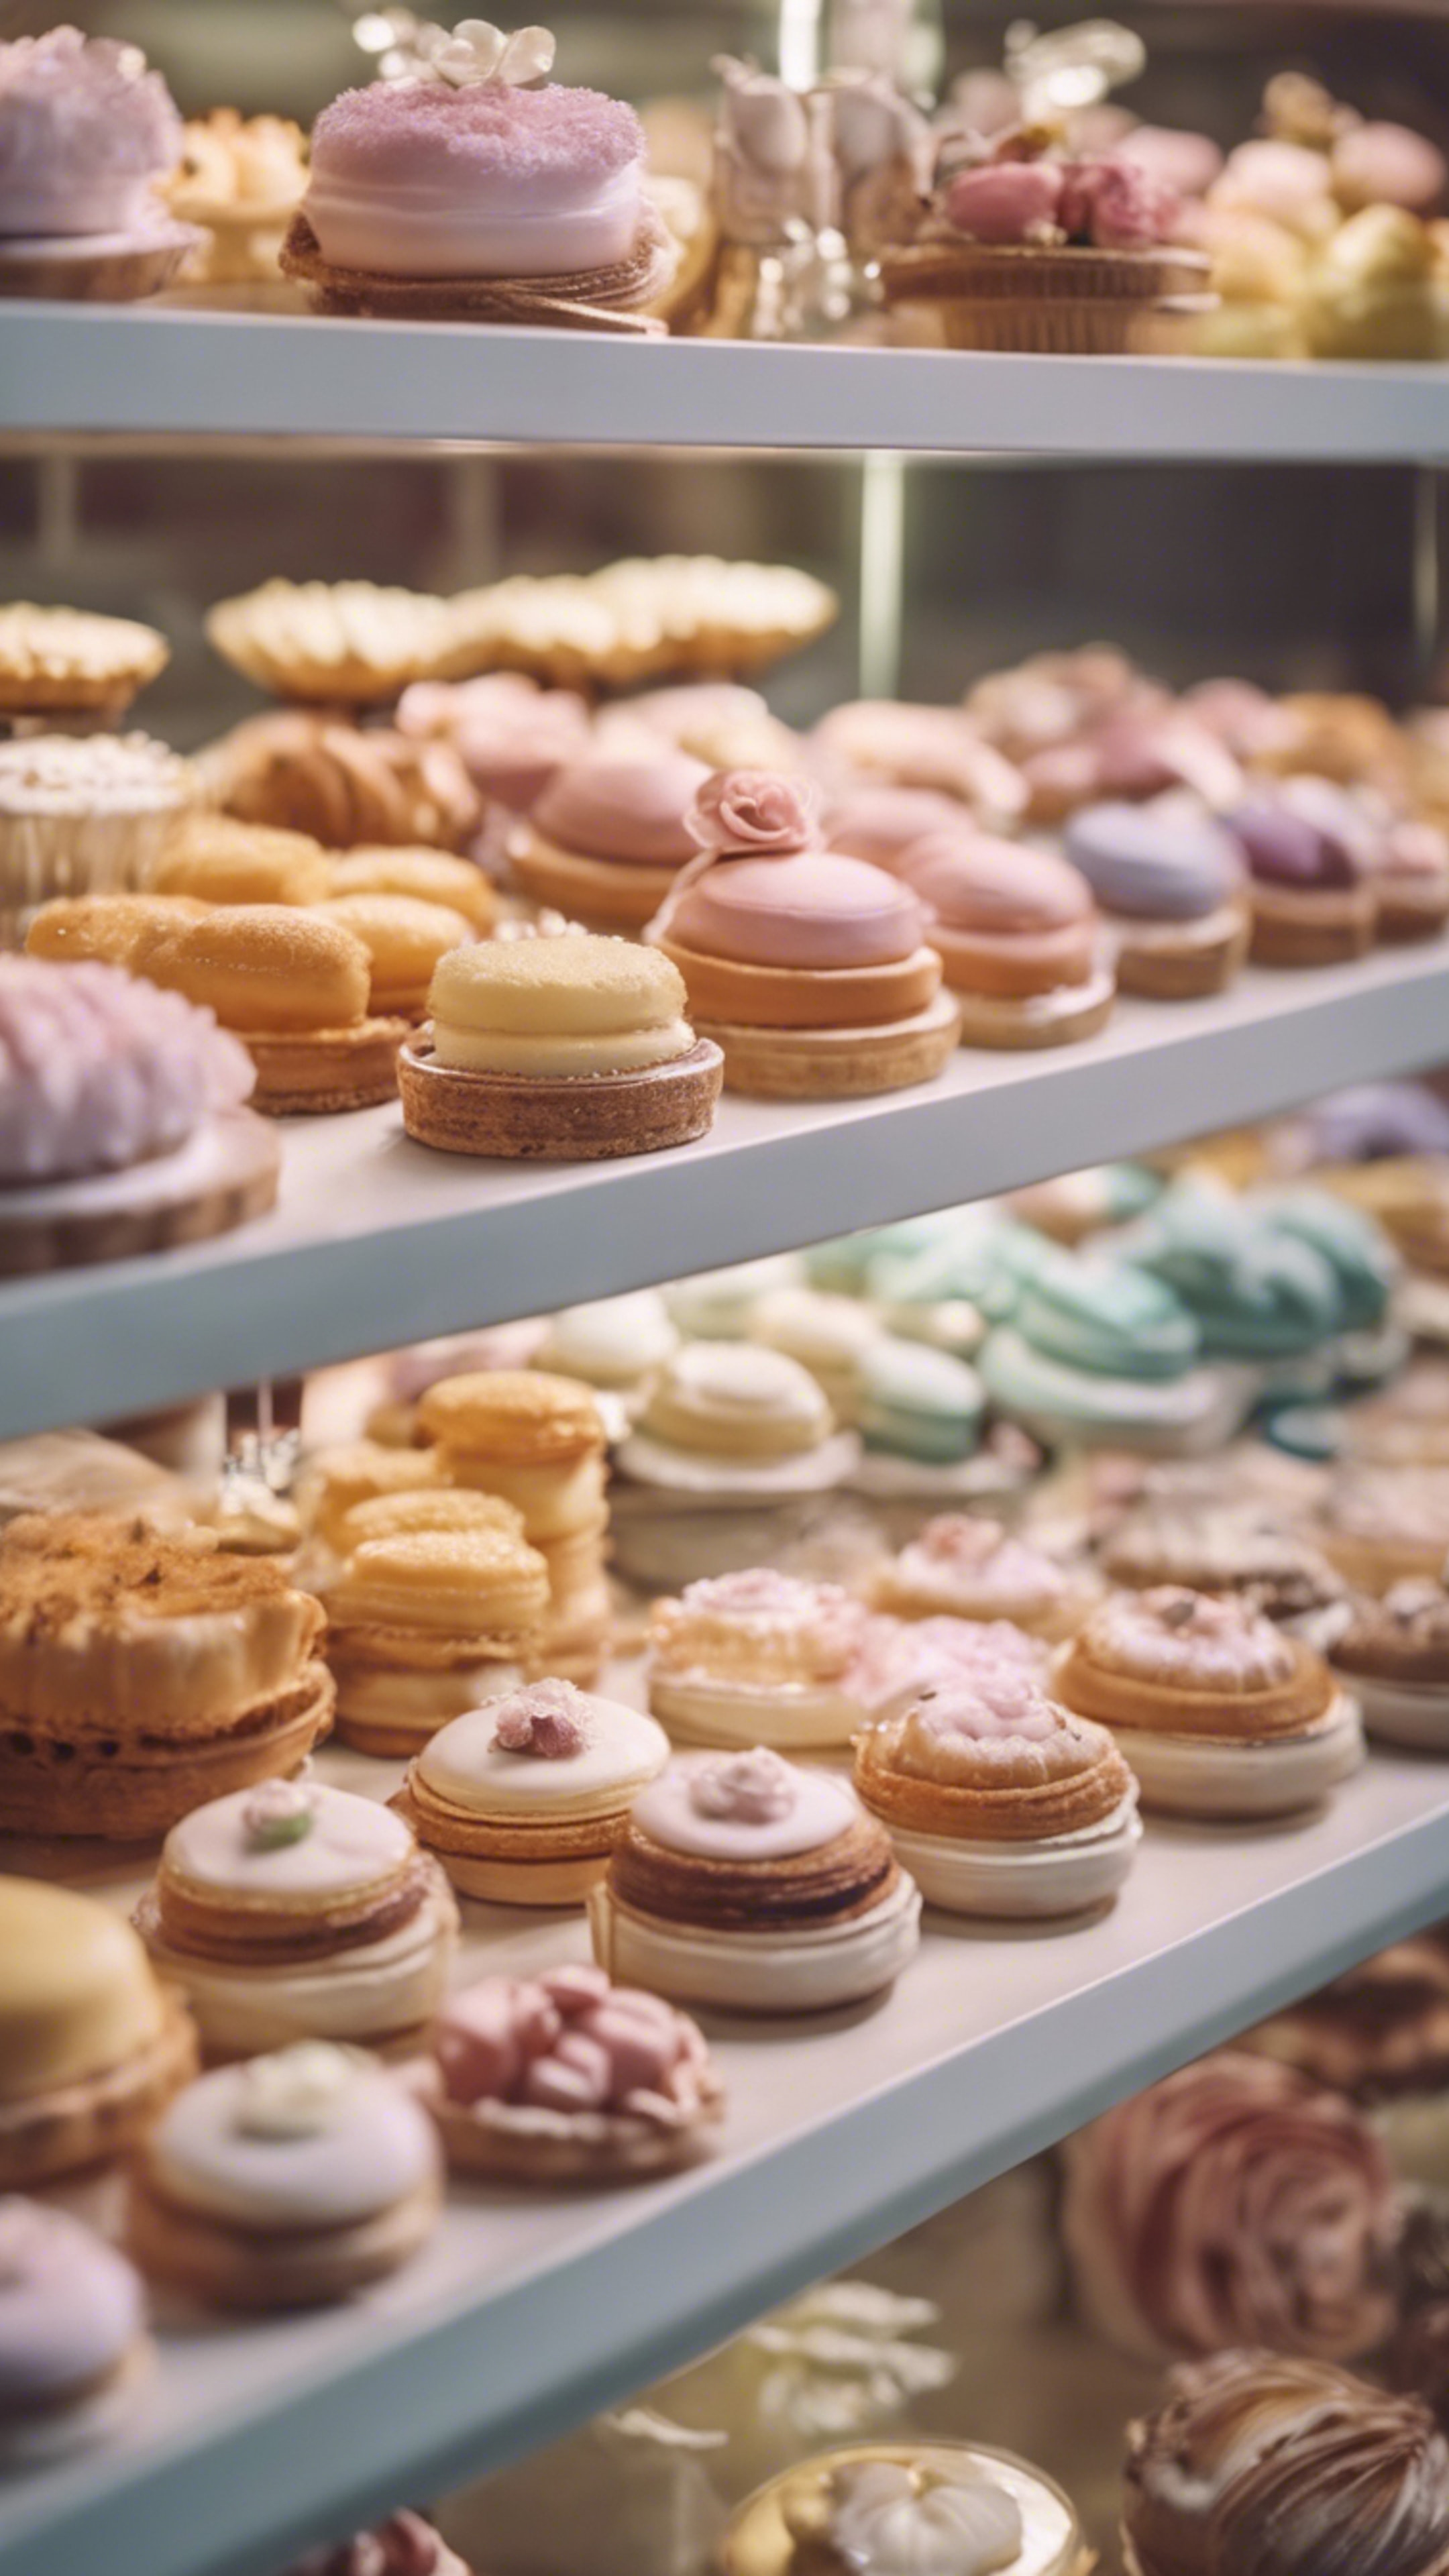 A classic French patisserie in pastel colors, filled with elegantly fashioned cakes and pastries. 牆紙[85bb484f9d7f40c5ac29]